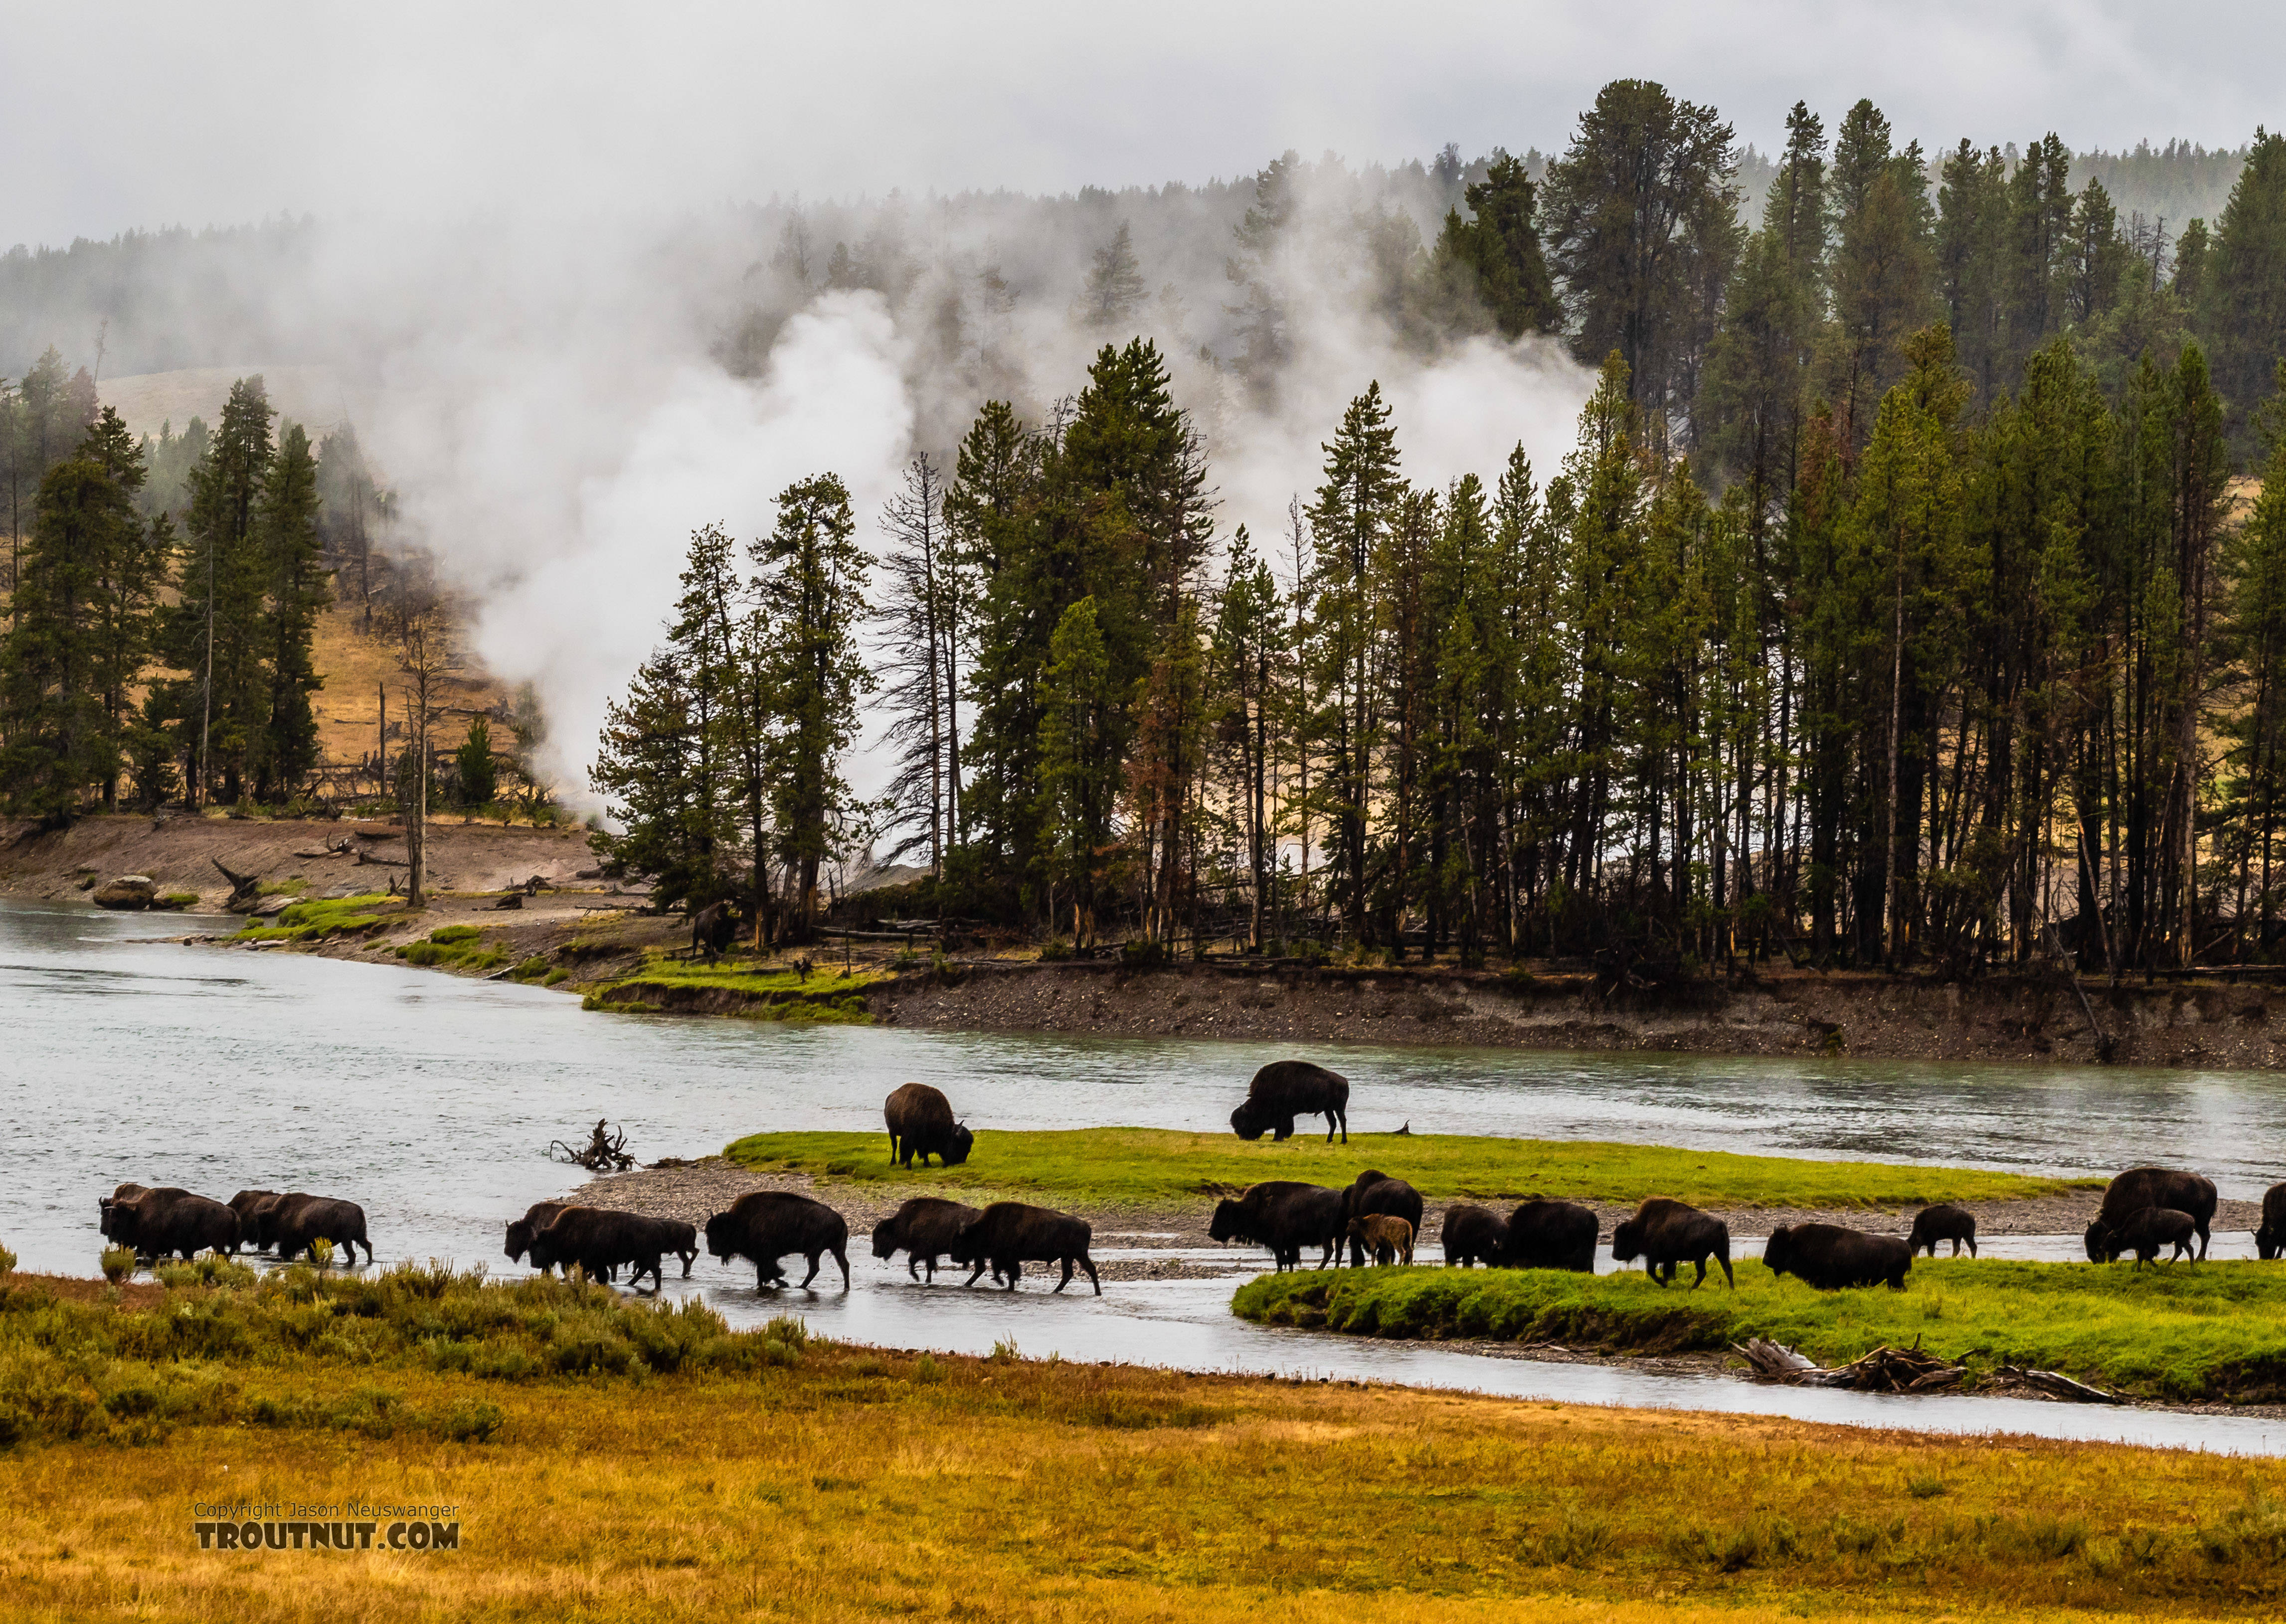 Bison crossing the Yellowstone River From the Yellowstone River in Wyoming.